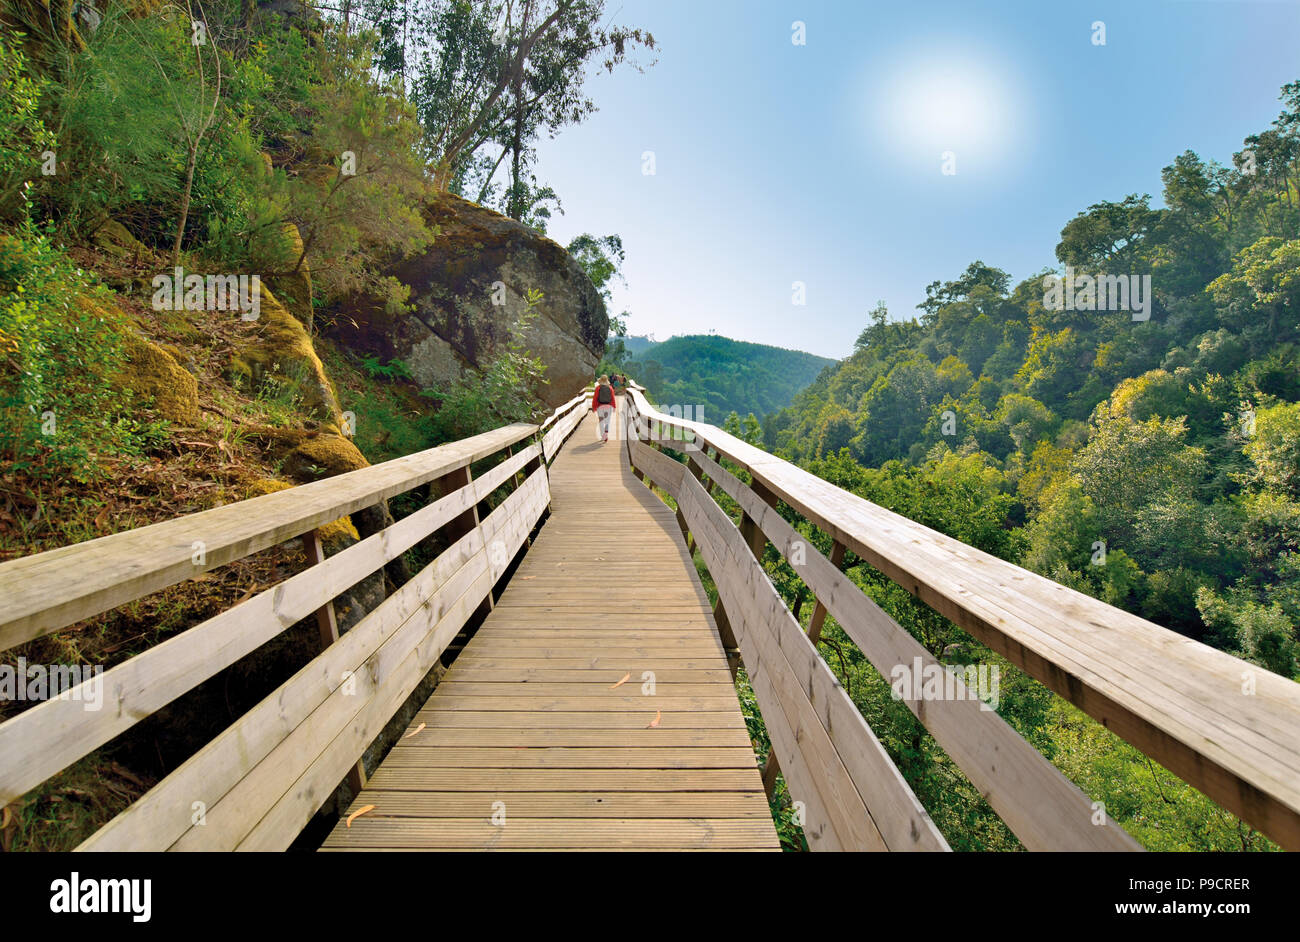 Woman walking on a wooden trail in the middle of a green valley Stock Photo